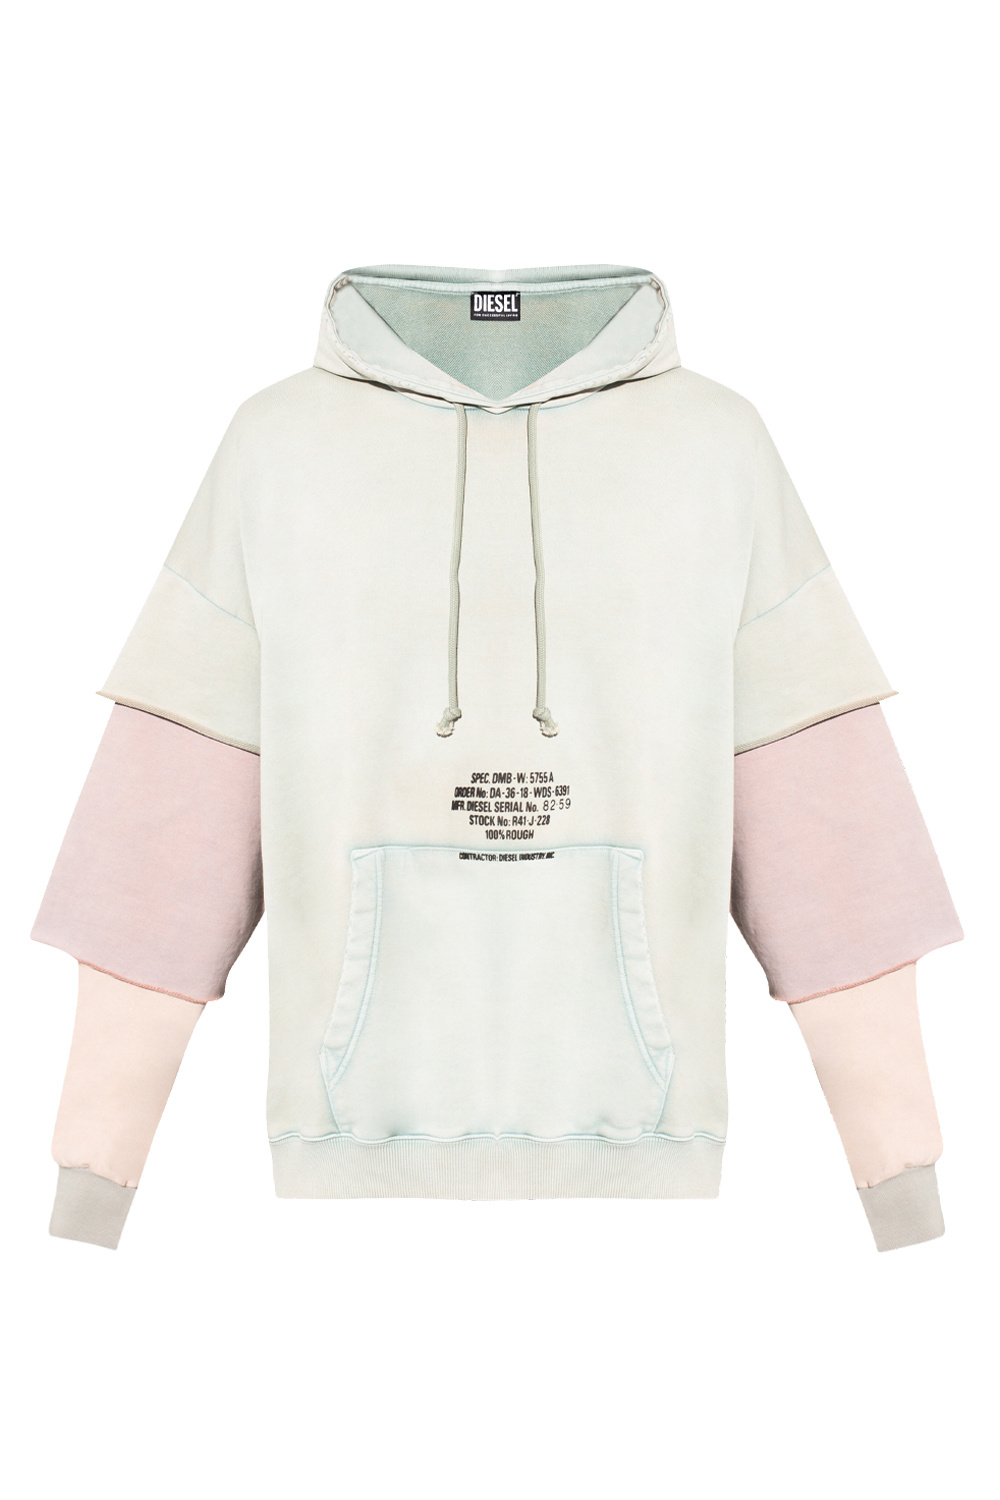 Multi-layered S-GRUBBER Hoodie